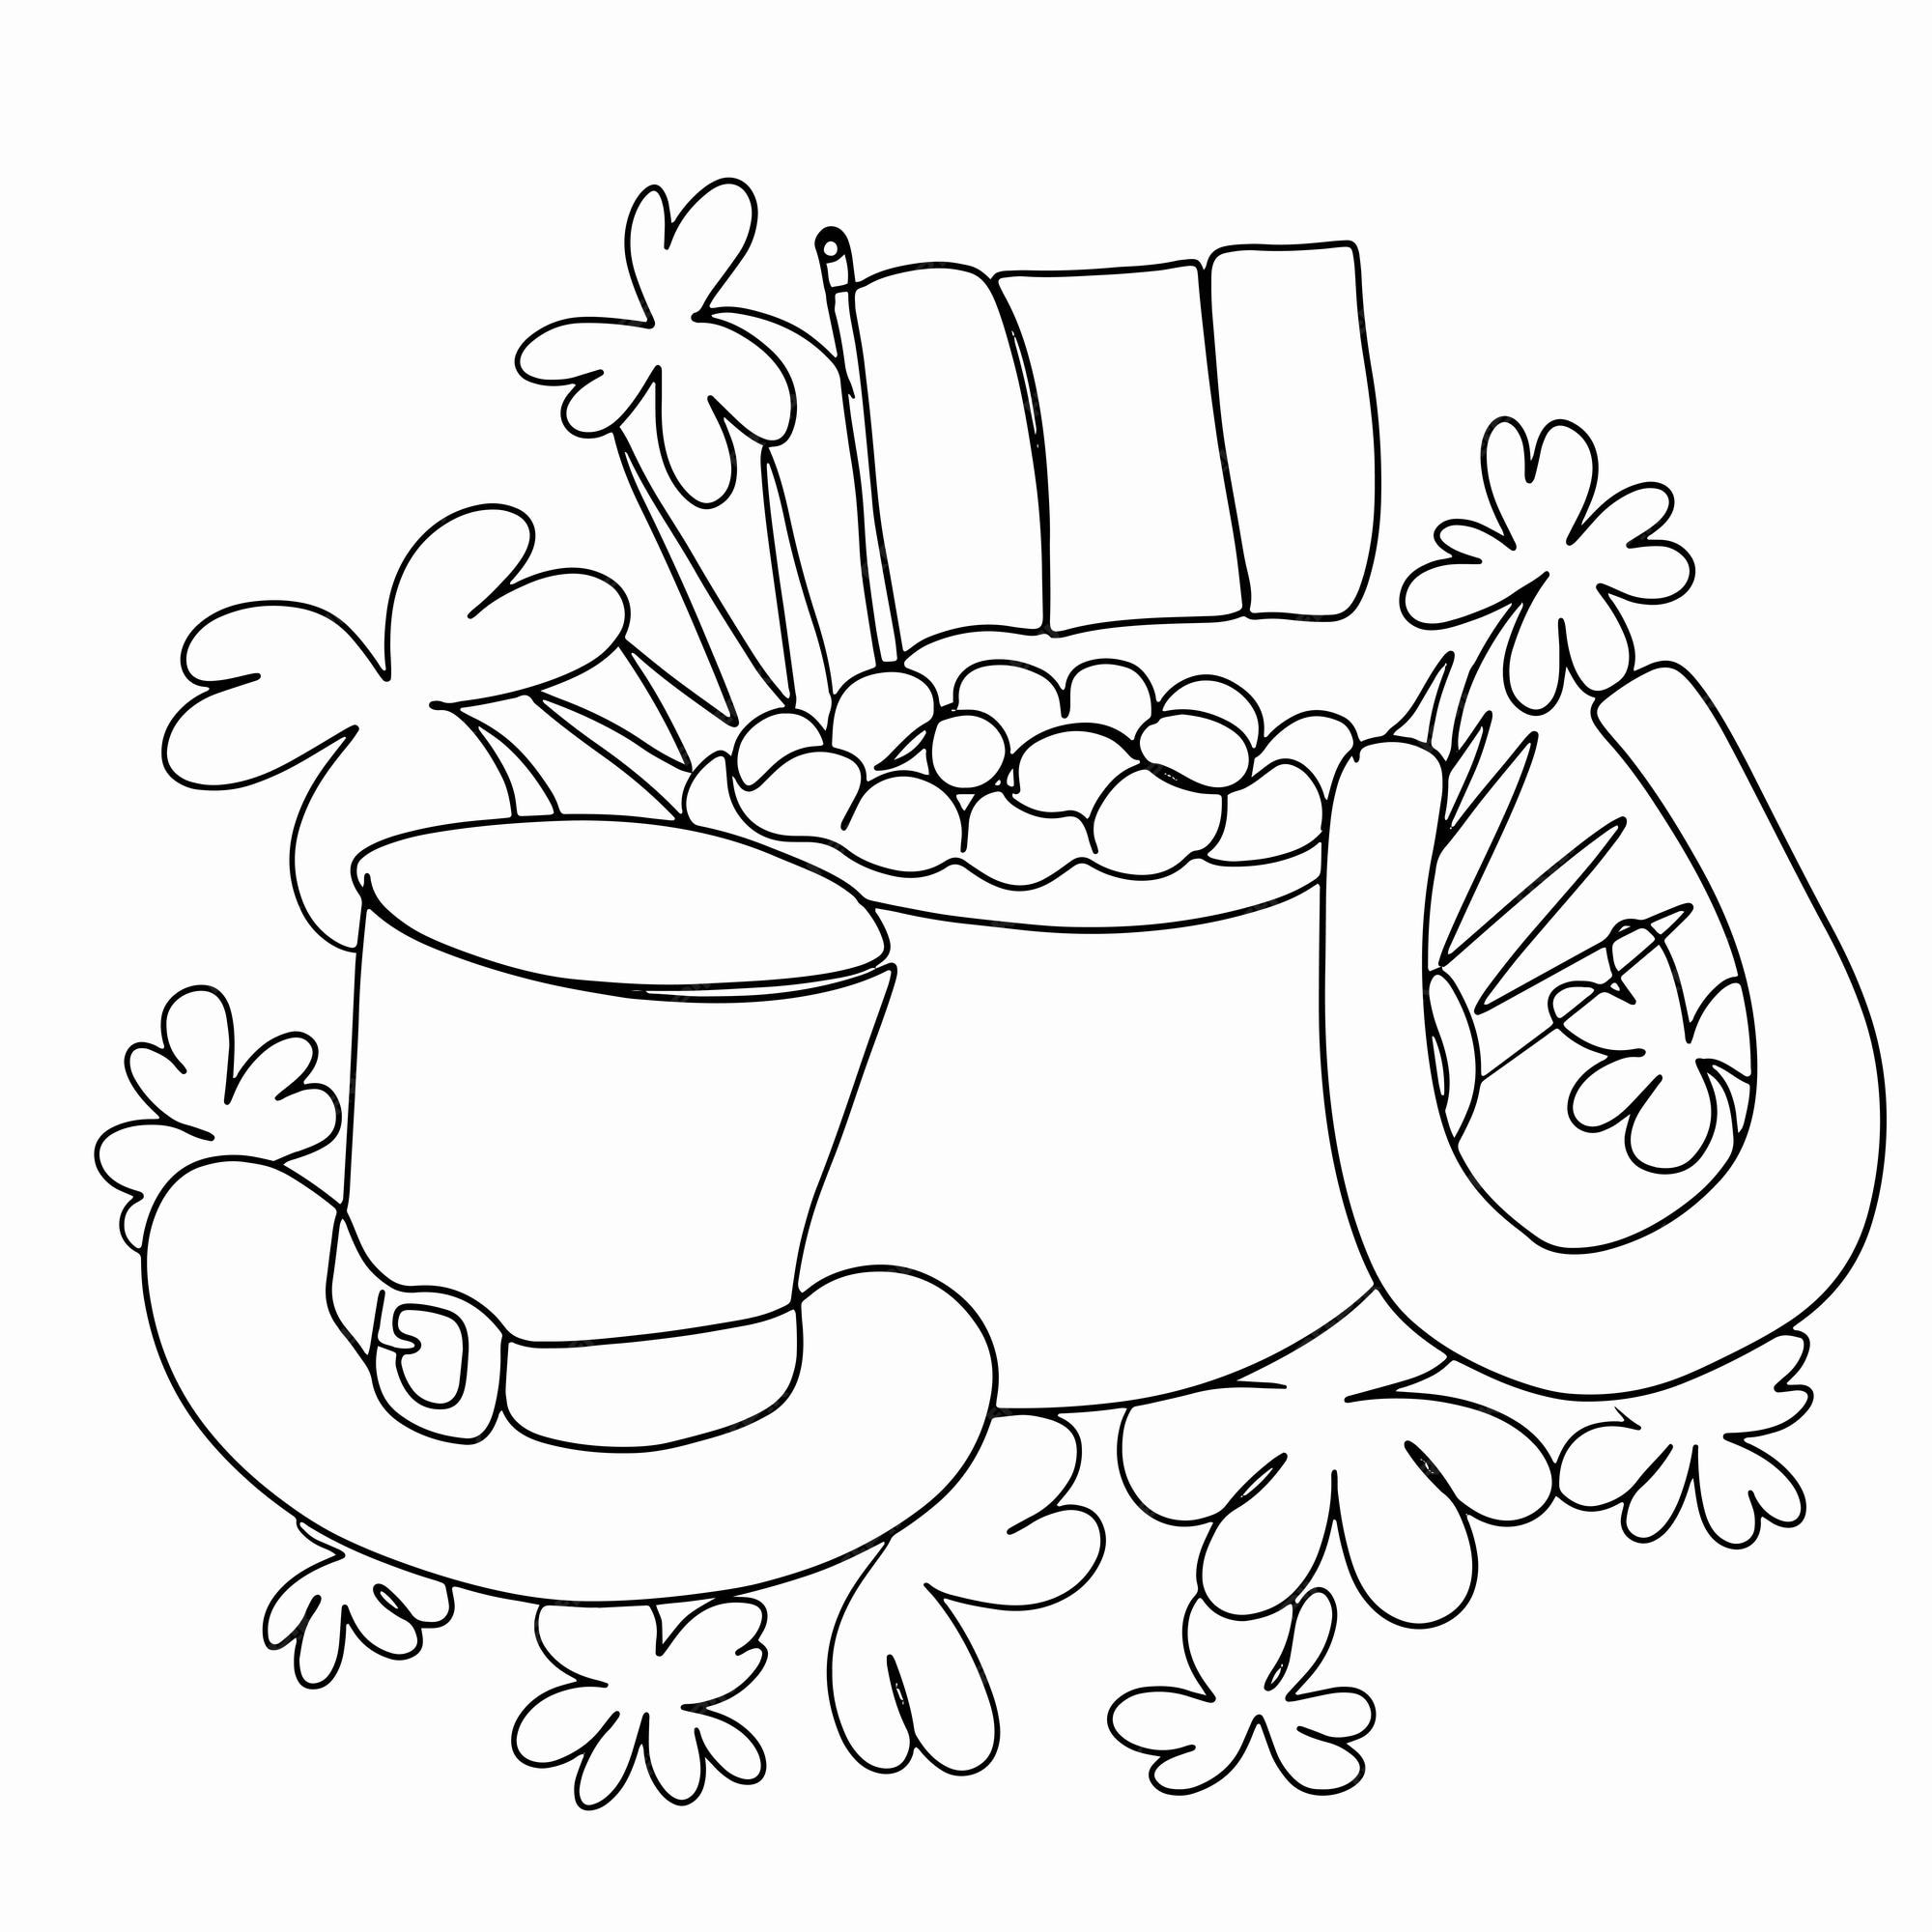 Premium vector pot of gold line art st patricks day outline drawing lucky charm sketch irish holiday